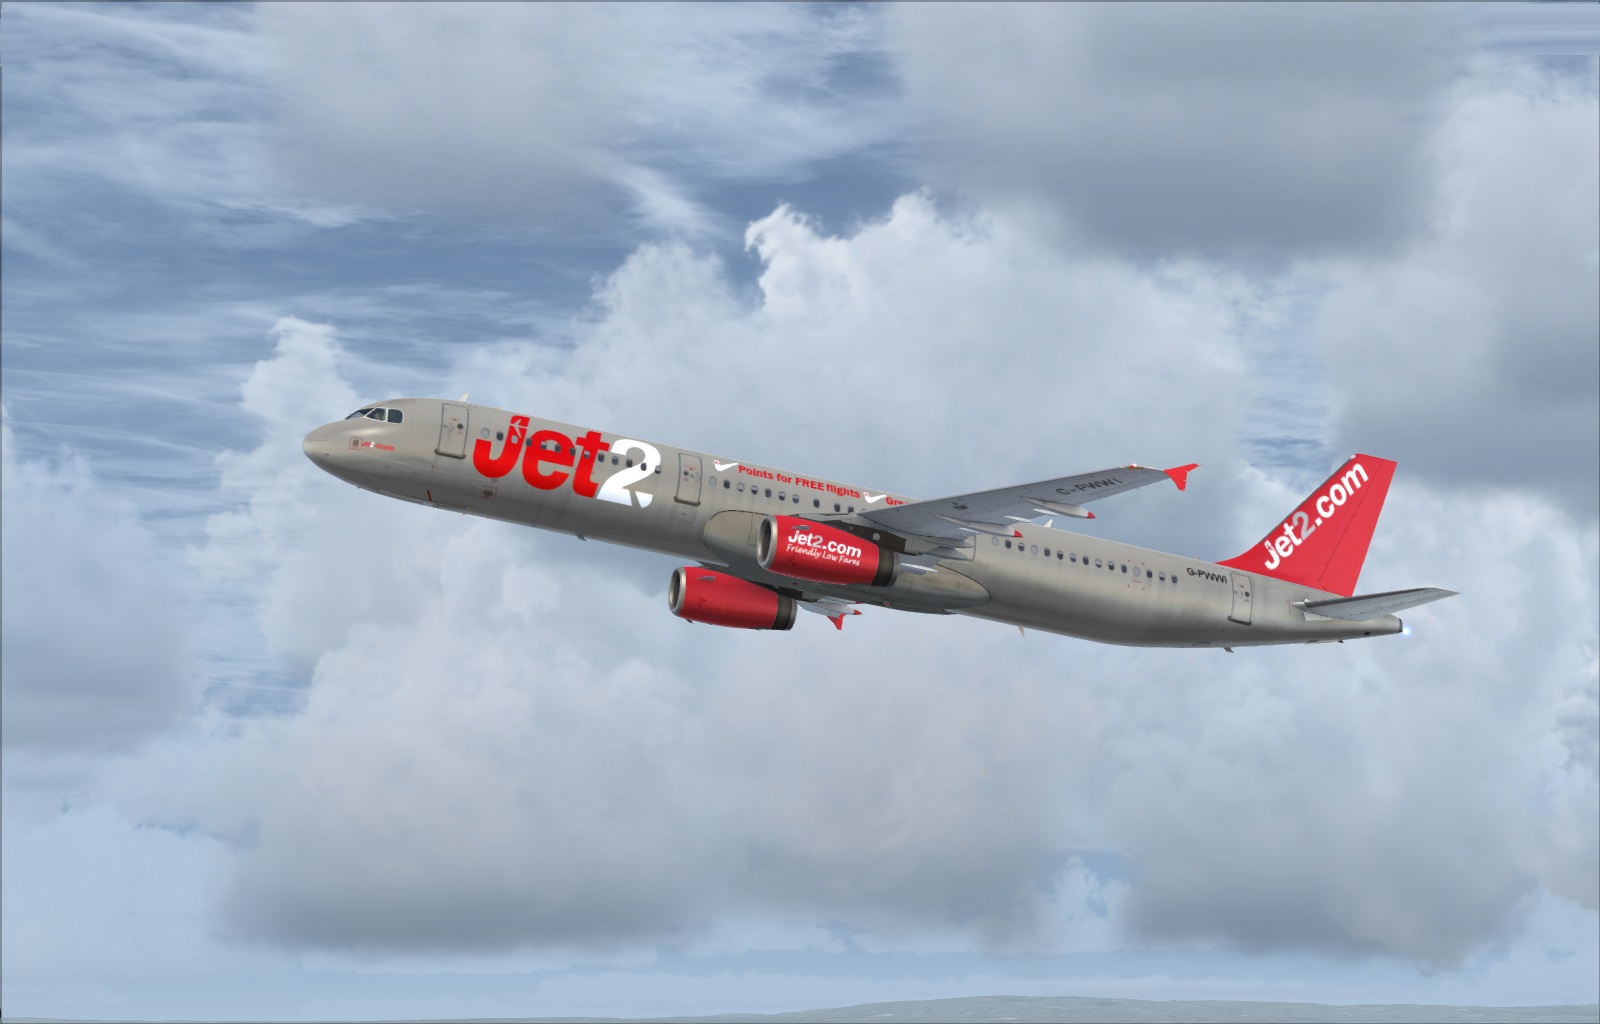 More information about "Jet2 Airbus A321"